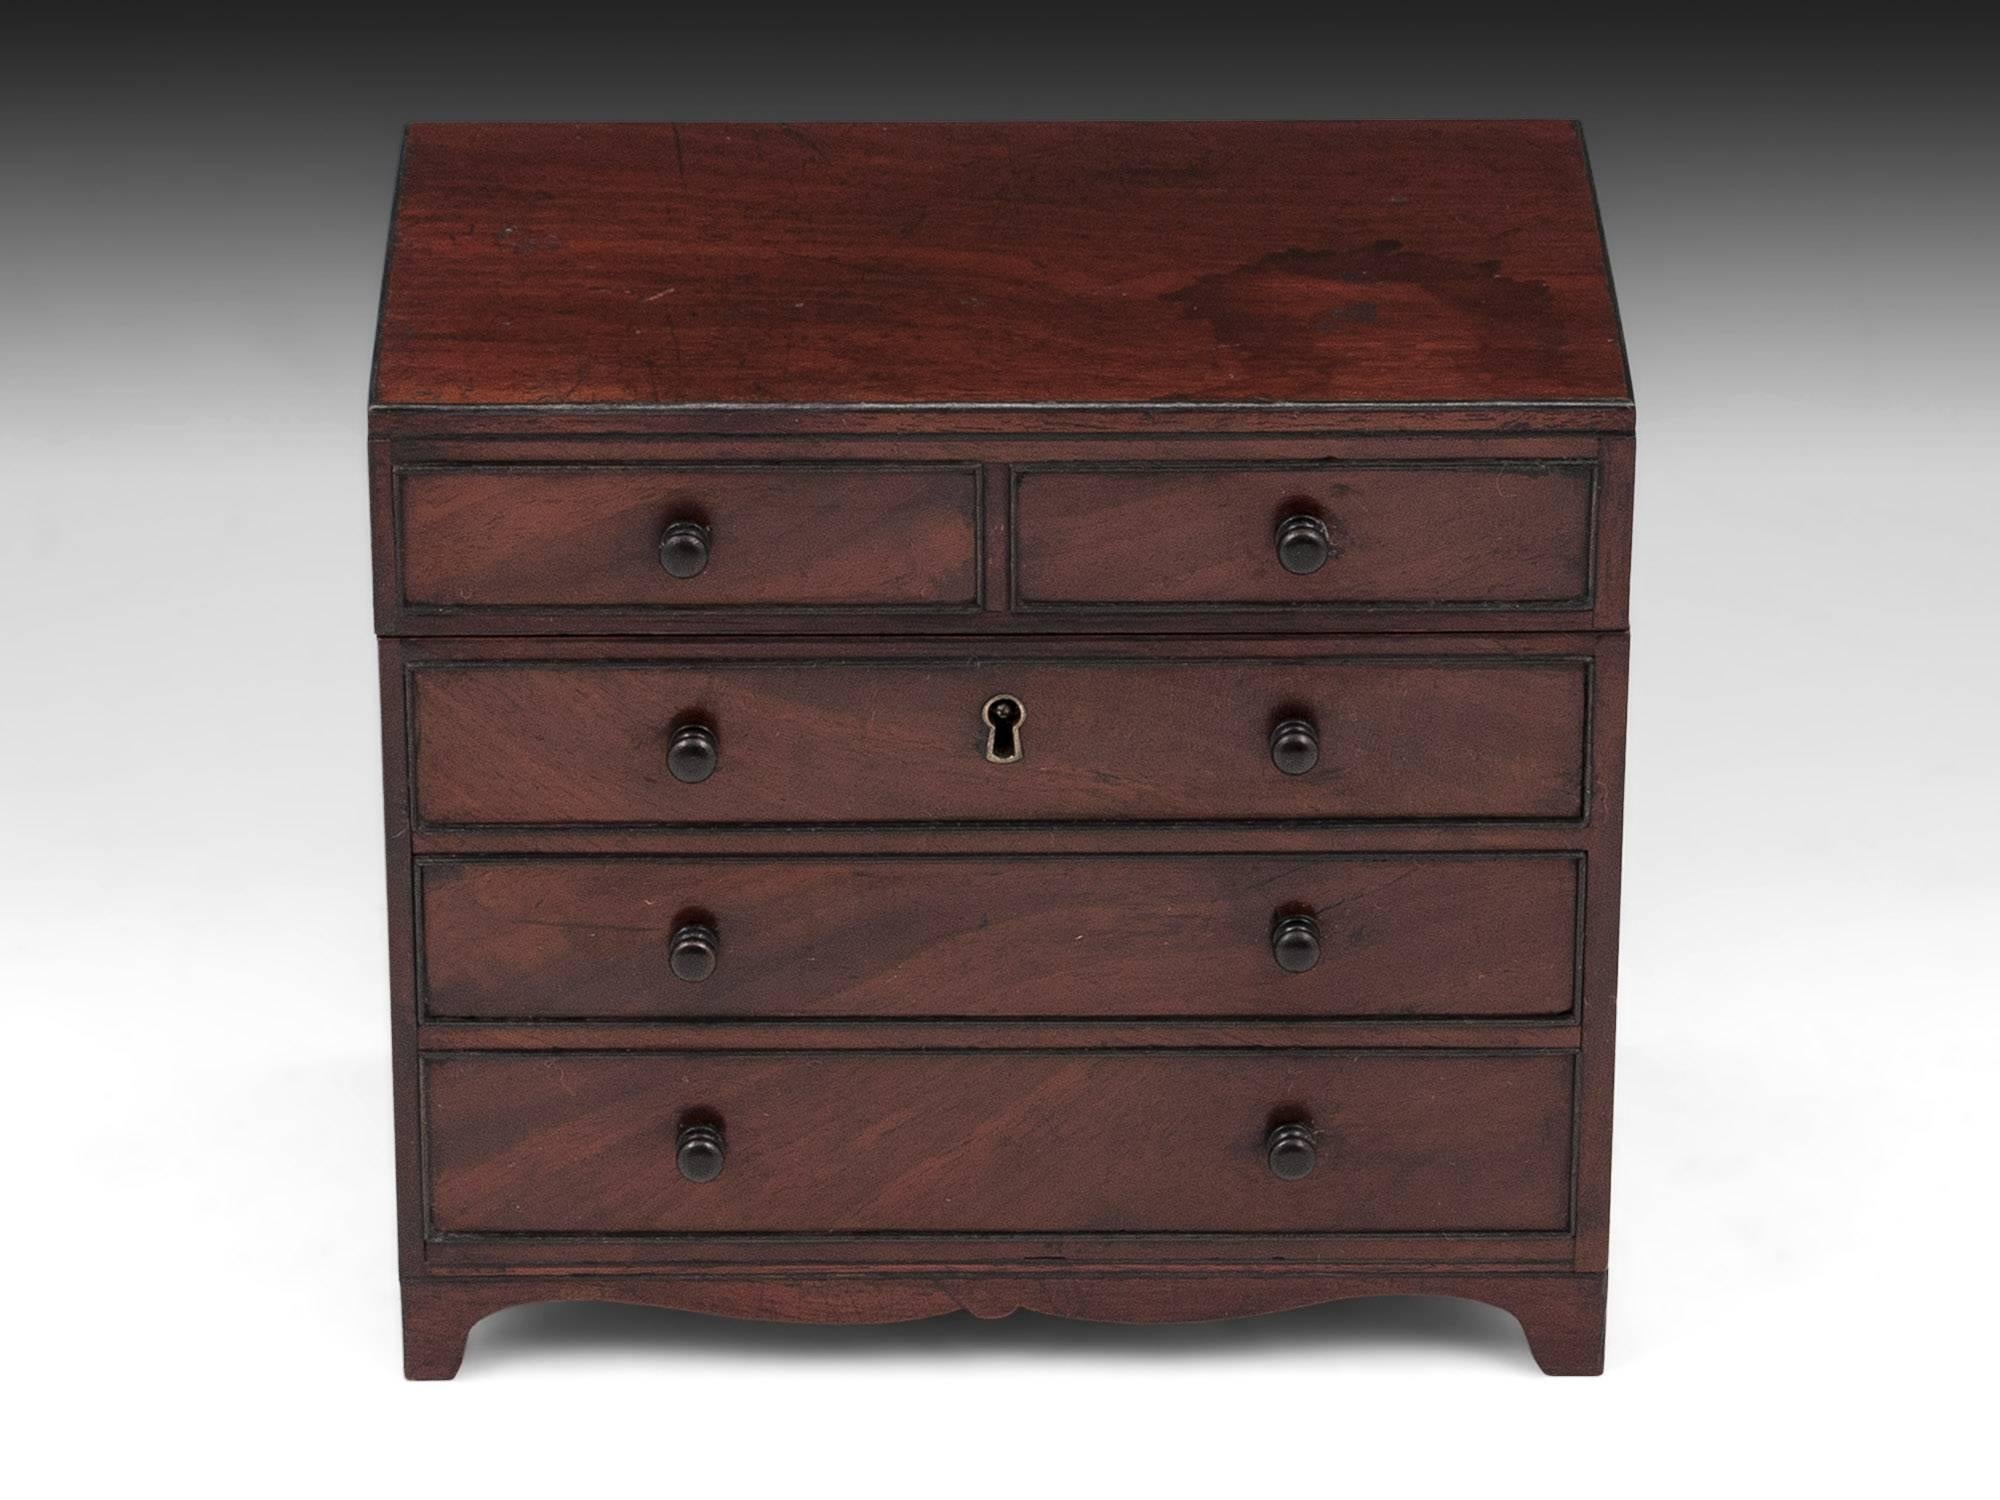 Rare mahogany tea caddy in the form of a chest a drawers. The interior has two compartments with most of their original lining, with two wooden lids with brass stringing and bone handles. 

This charming tea caddy comes with a fully working lock